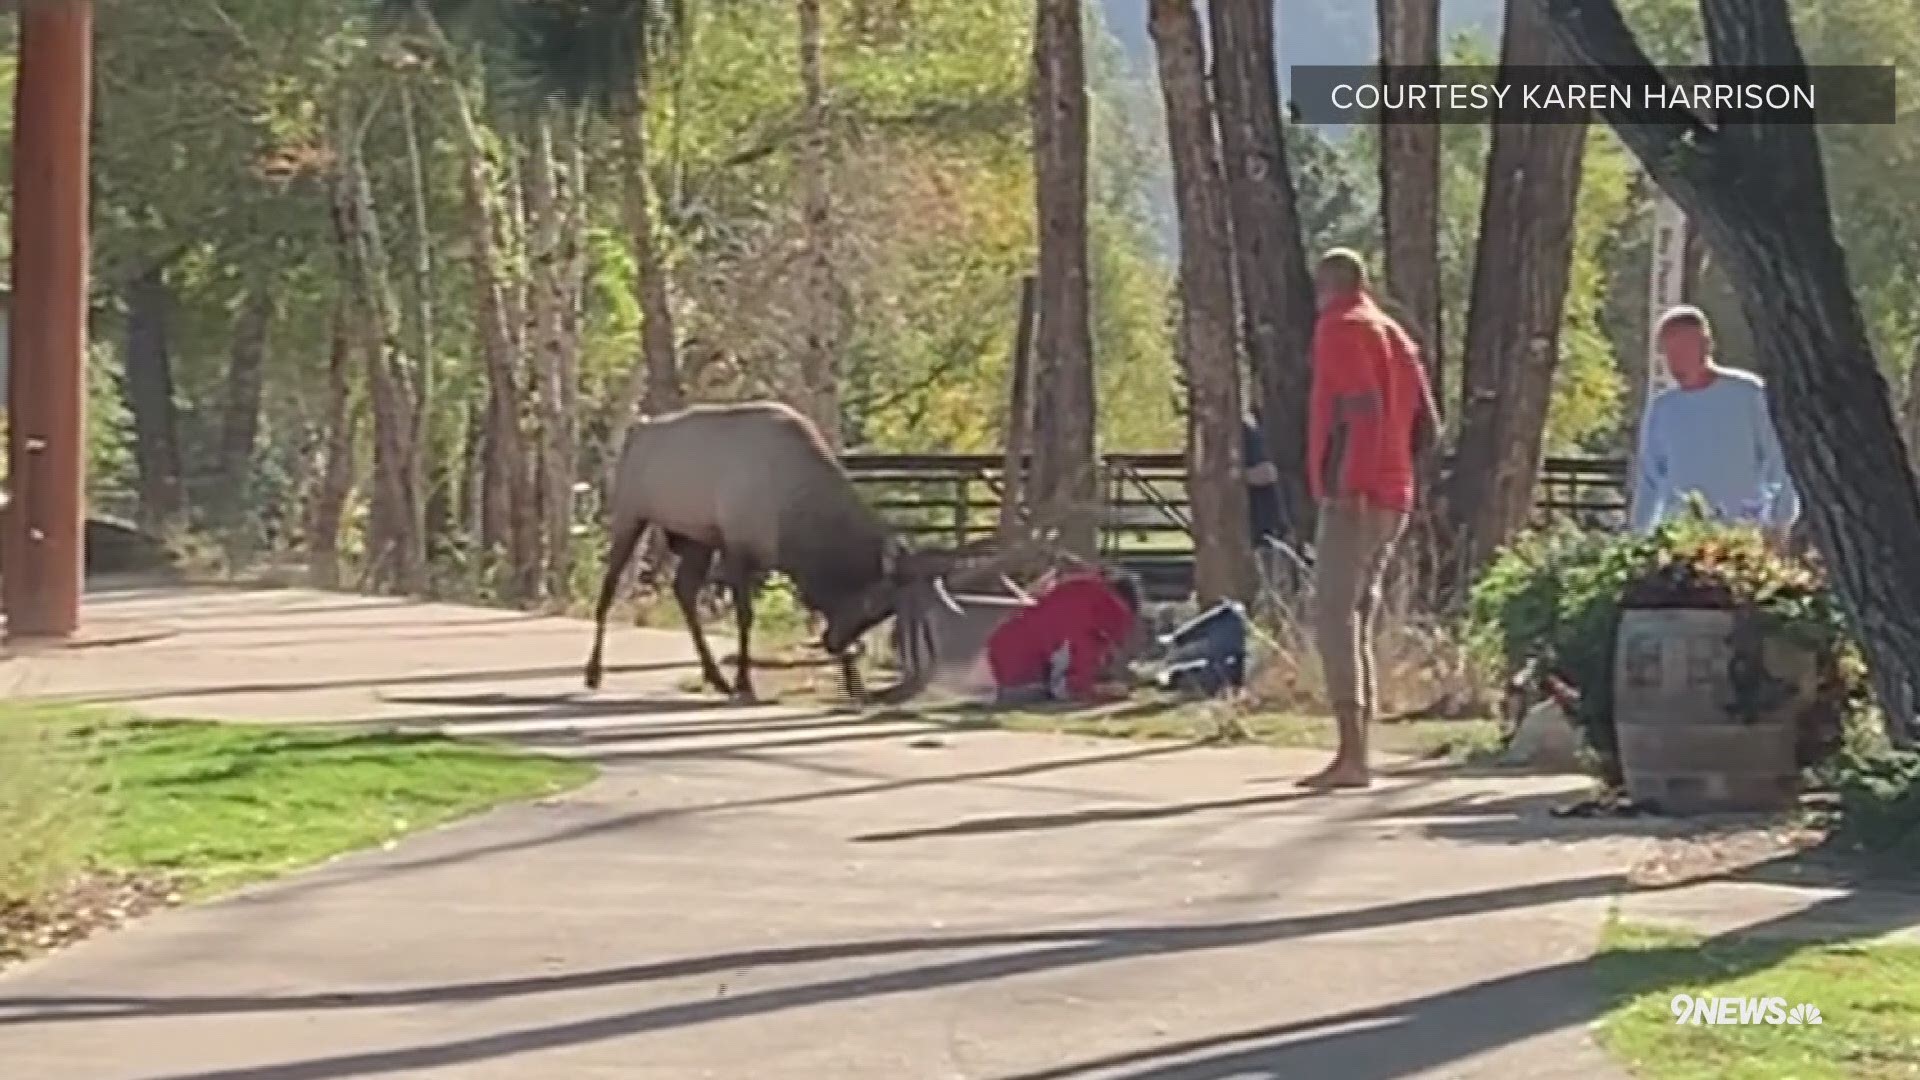 Karen Harrison shared this video of a bull elk charging at people in Estes Park on Thursday.